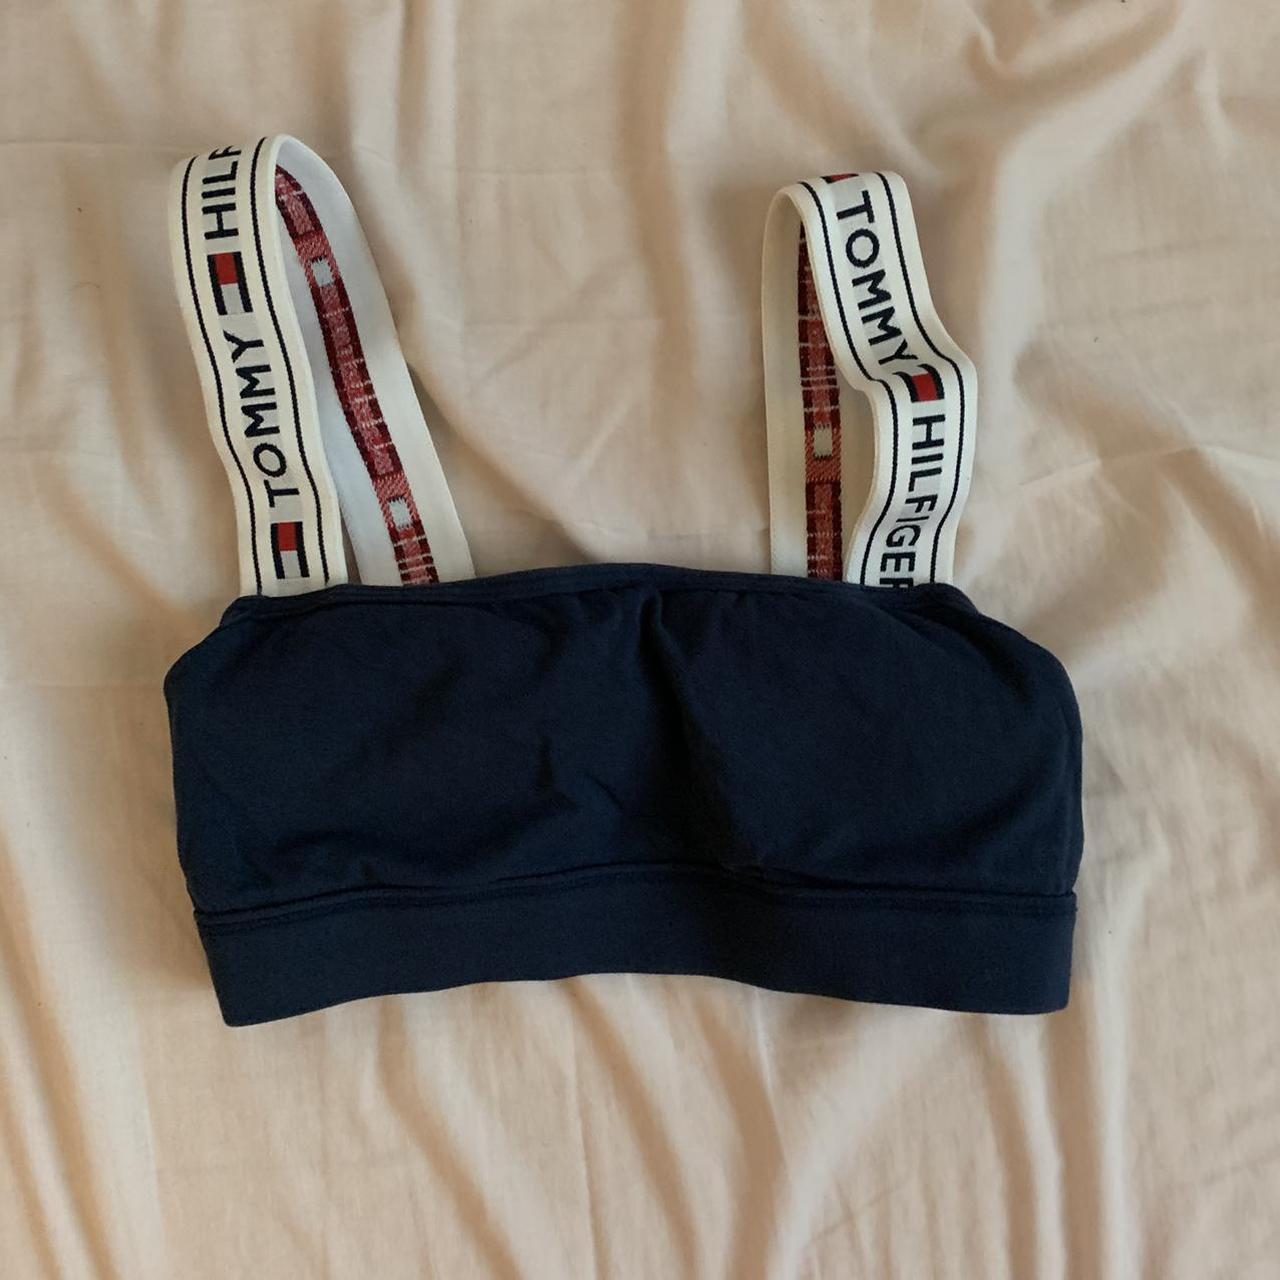 Product Image 1 - Tommy Hilfiger Bralette
size: xs
never worn
very